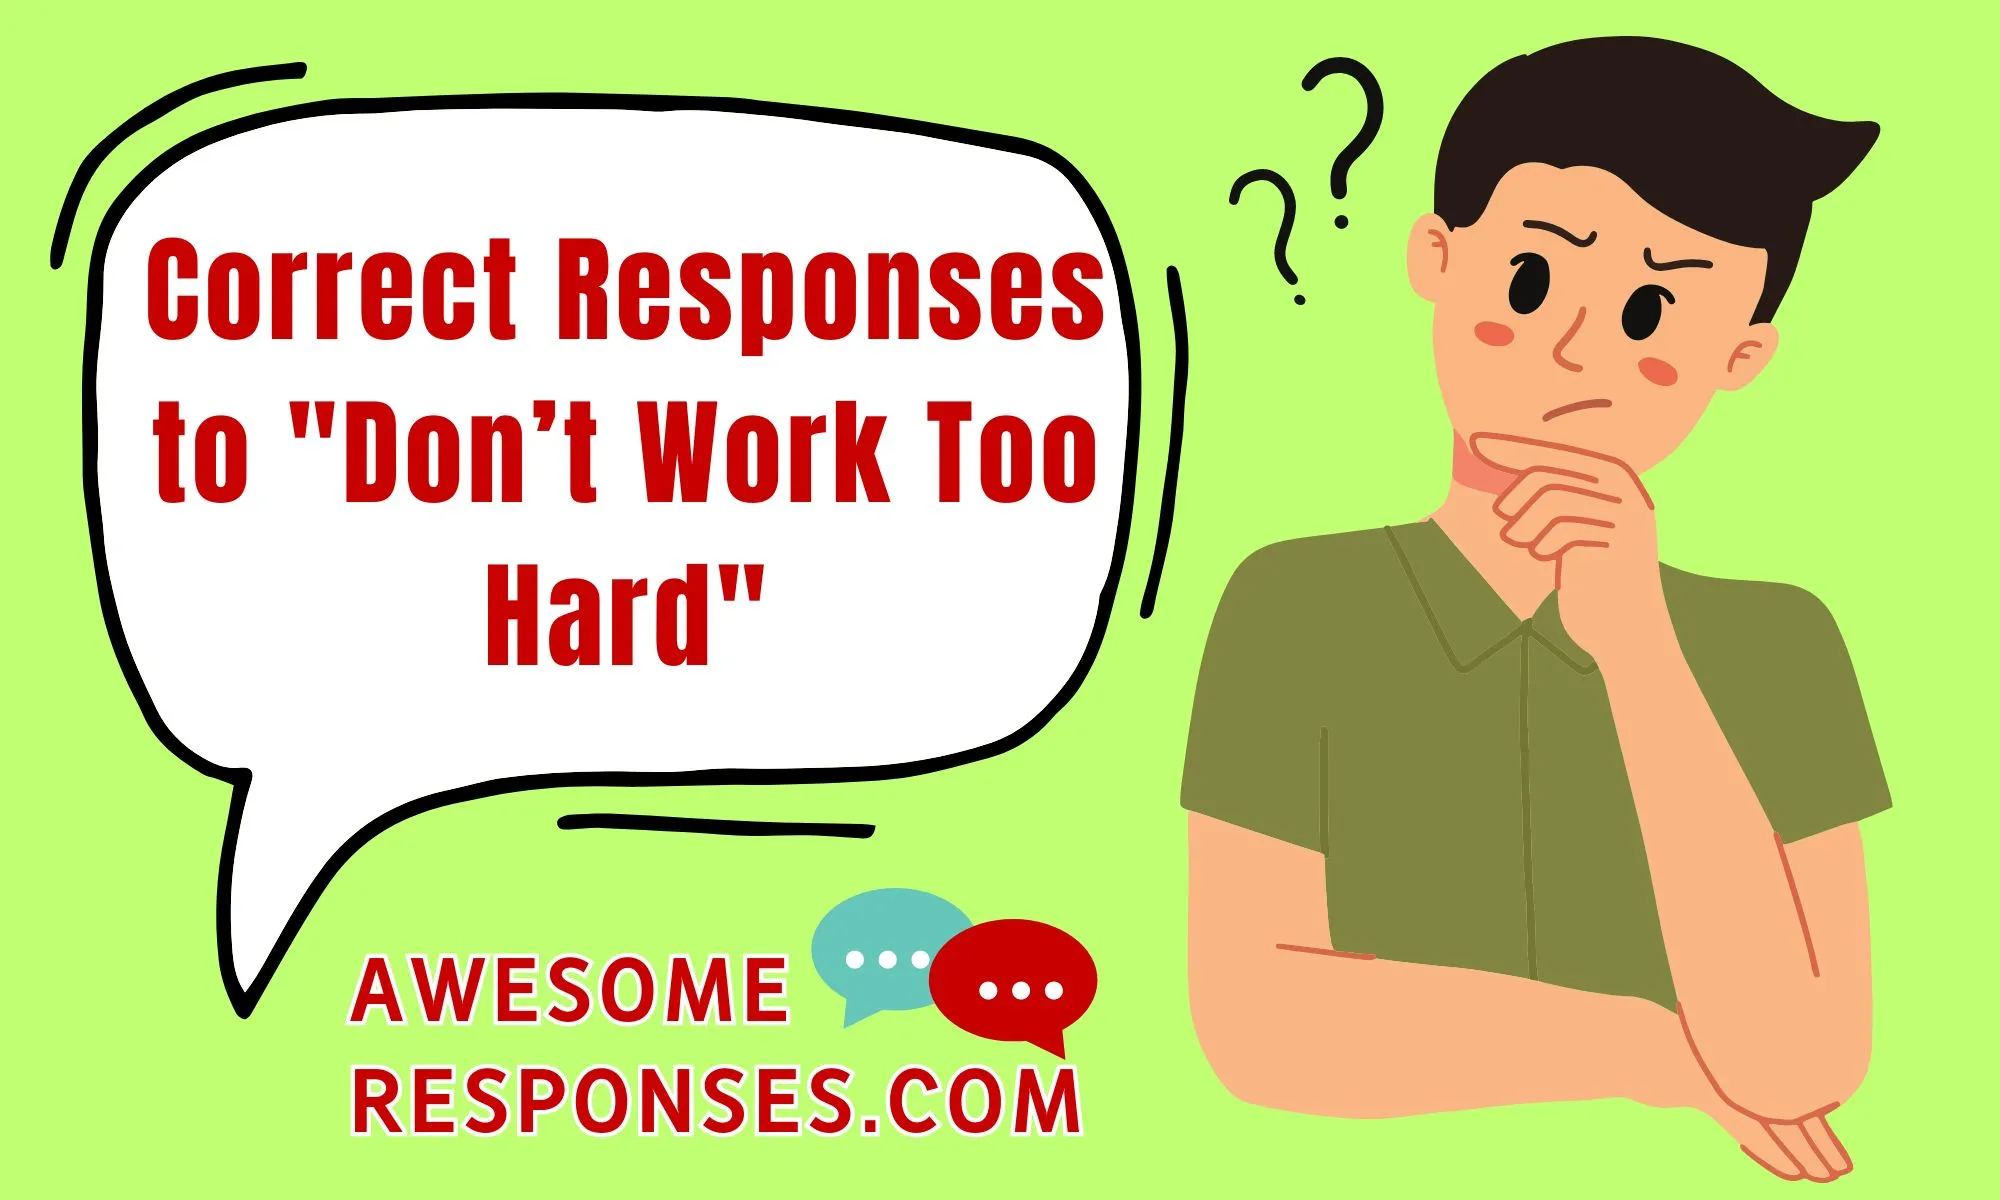 Correct Responses to "Don’t Work Too Hard"